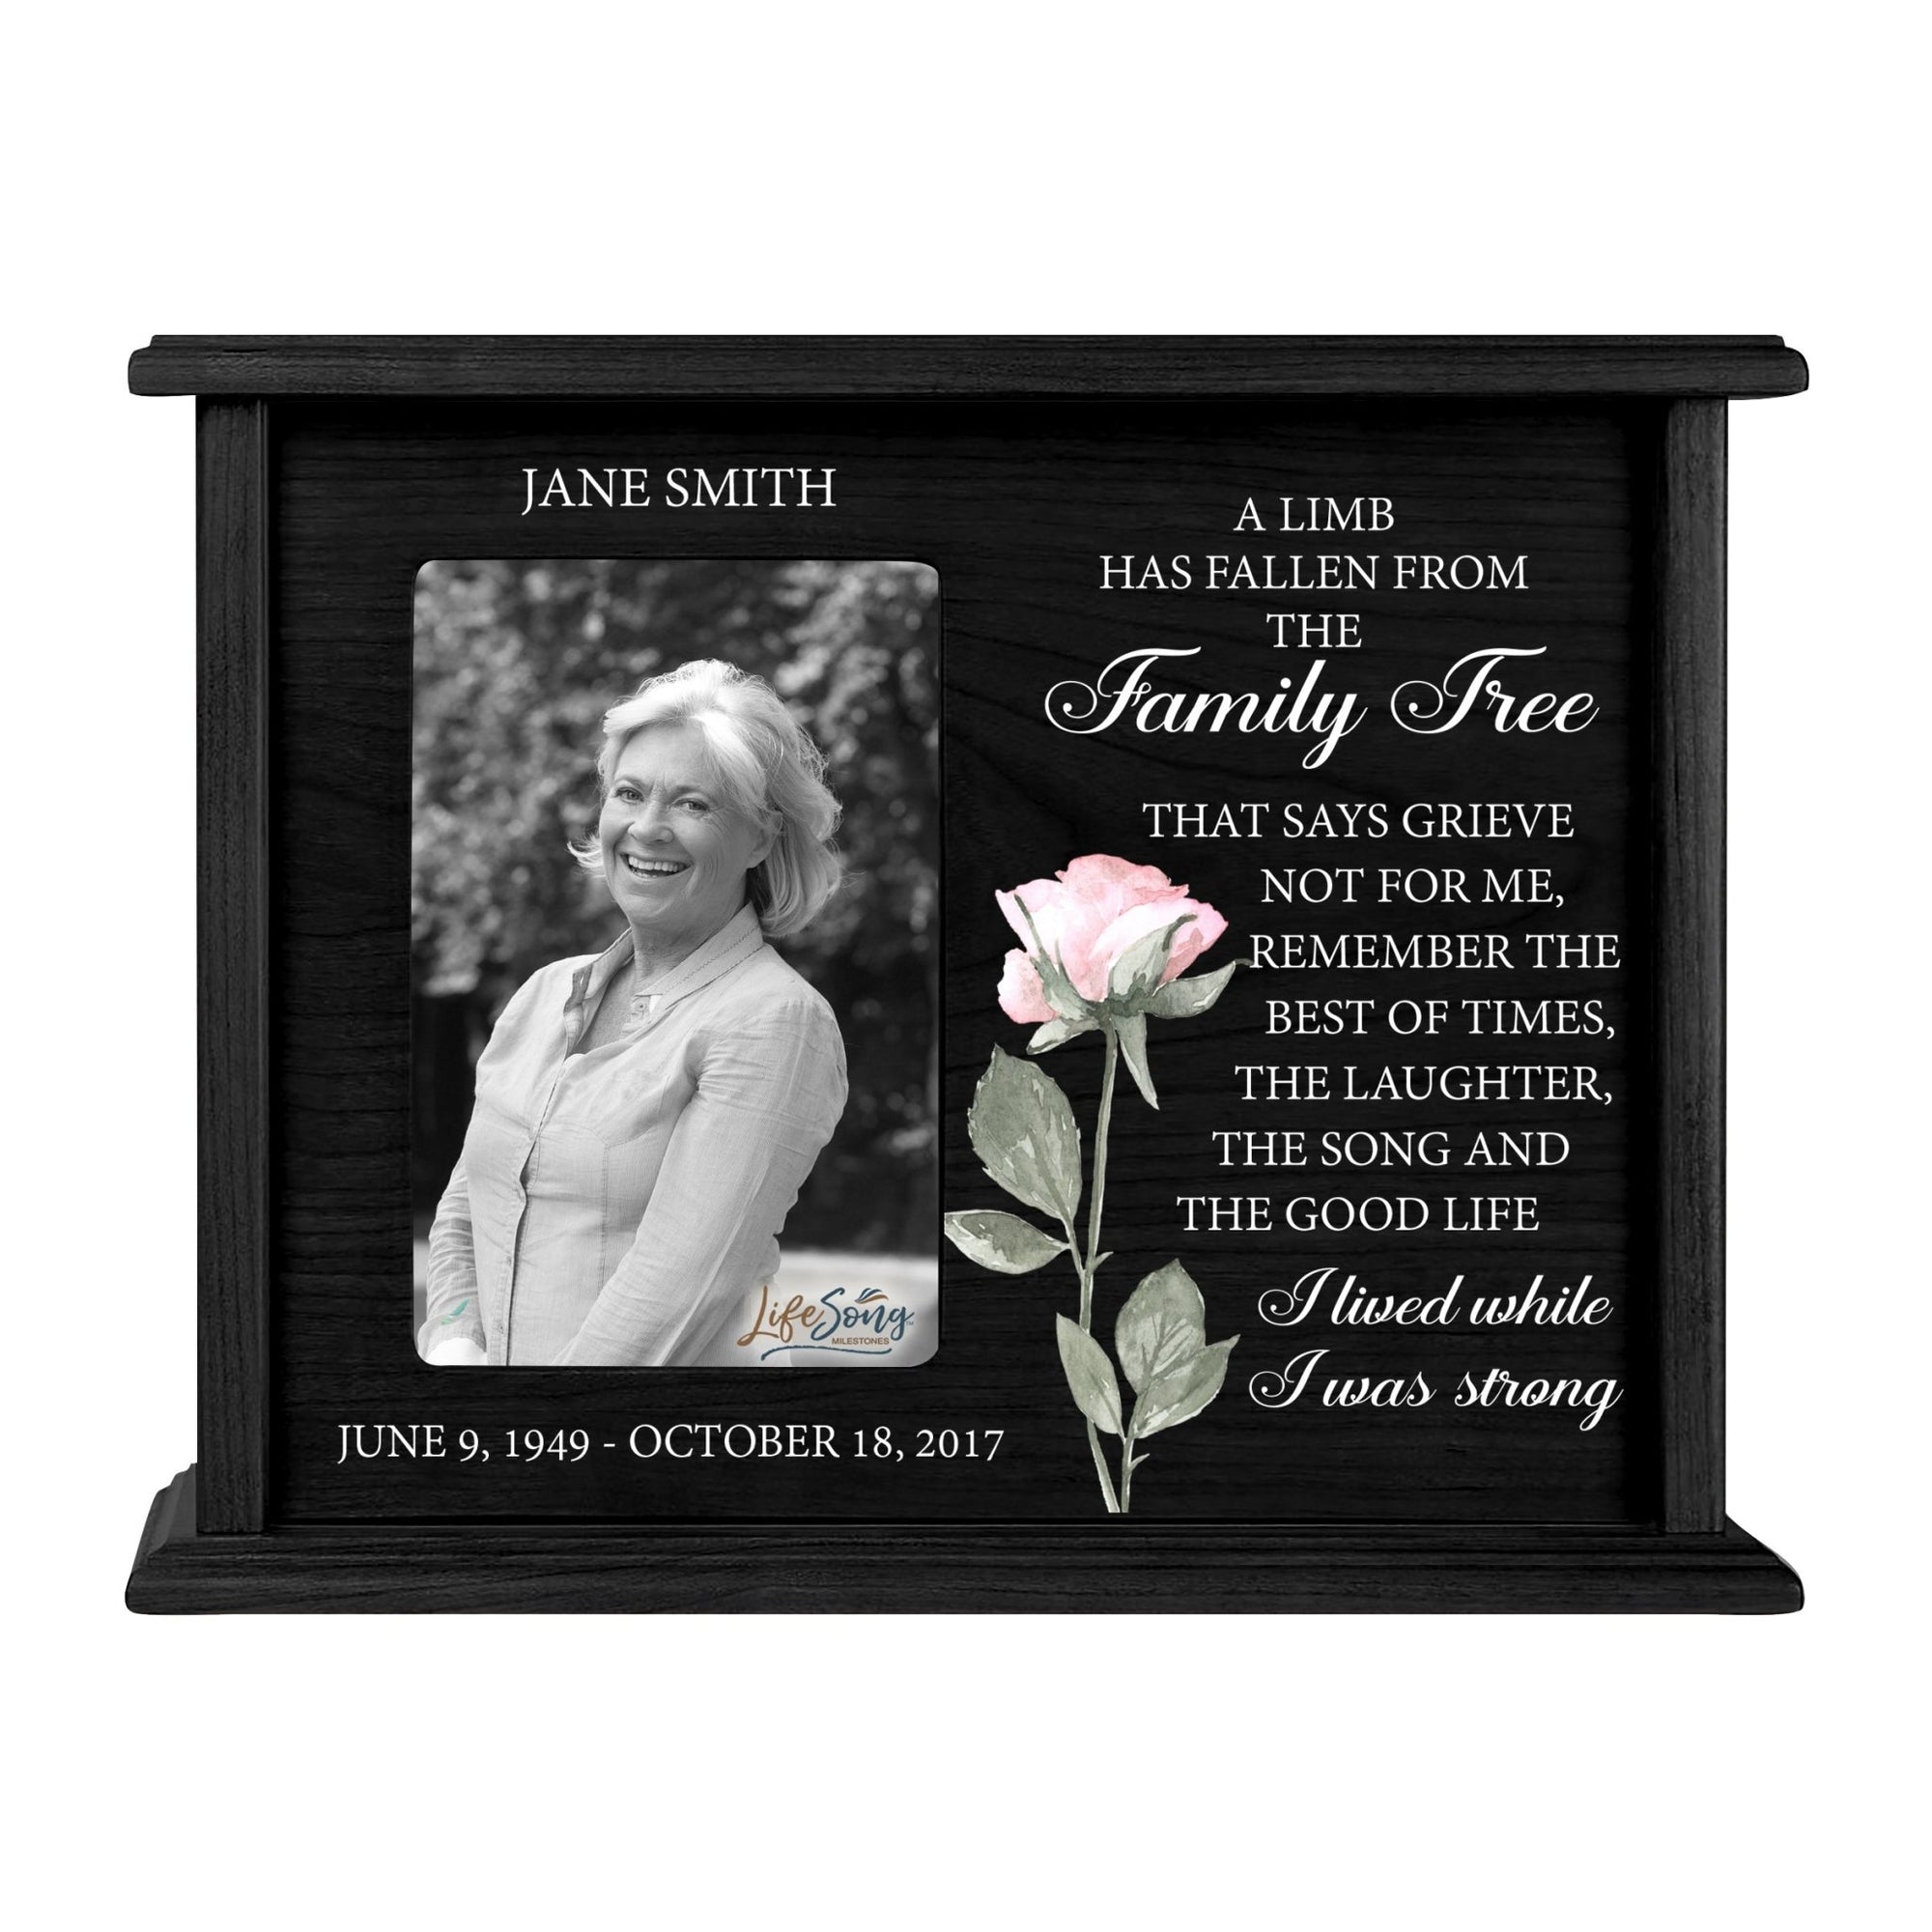 Personalized Memorial Cherry Wood 12 x 4.5 x 9 Cremation Urn Box with Picture Frame holds 200 cu in of Human Ashes and 4x6 Photo - A Limb Has Fallen (Black) - LifeSong Milestones